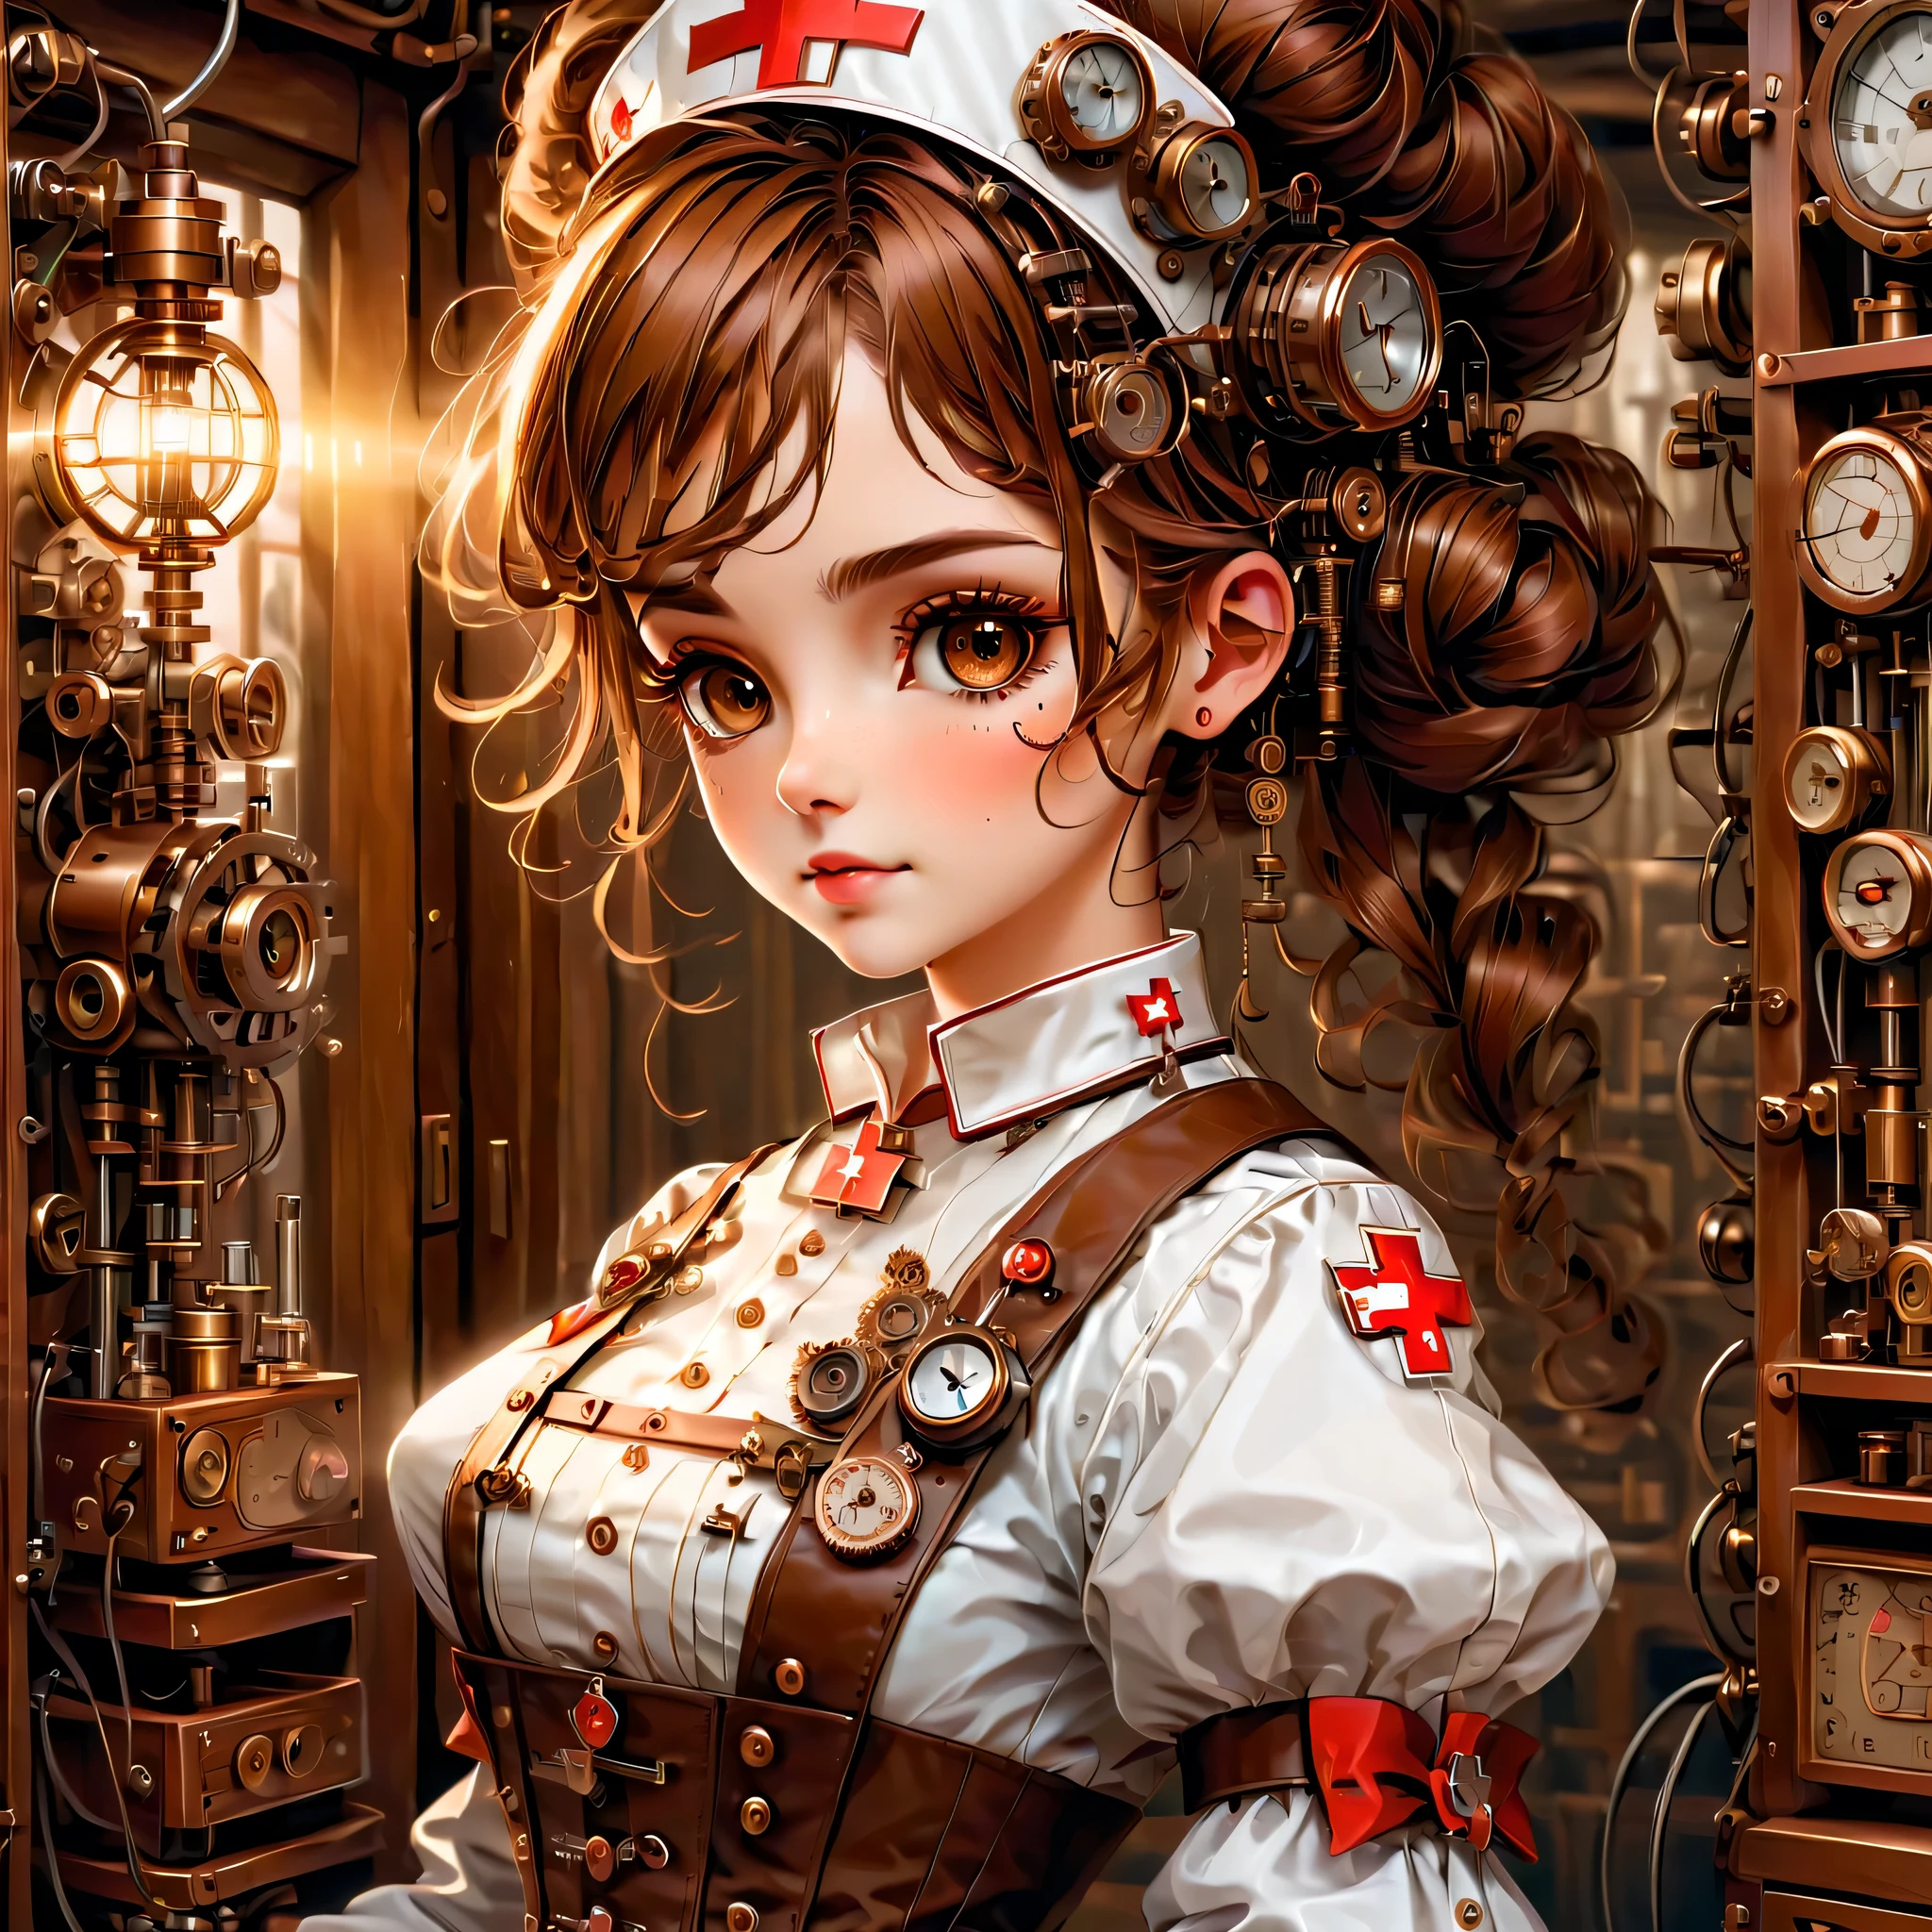 mechanism:humanoid:nurse:16th century European nurse uniform,doll face:perfect face:big brown eyes,eyelash,hide hair wires,she is made of machinery,Steampunk element,Mechanical engineering,Mechanically,Mechanical,pop,cute,intricate details,very fine,High resolution,high quality,最high quality,clearly,Be clear,beautiful light and shadow,Three dimensions,adorable appearance,complex configuration,mechanism,dynamic,busy,Work hard,An expression that makes you want to support,Medical equipment,medical supplies shelf,vial,show evidence that it is a machine,light from window